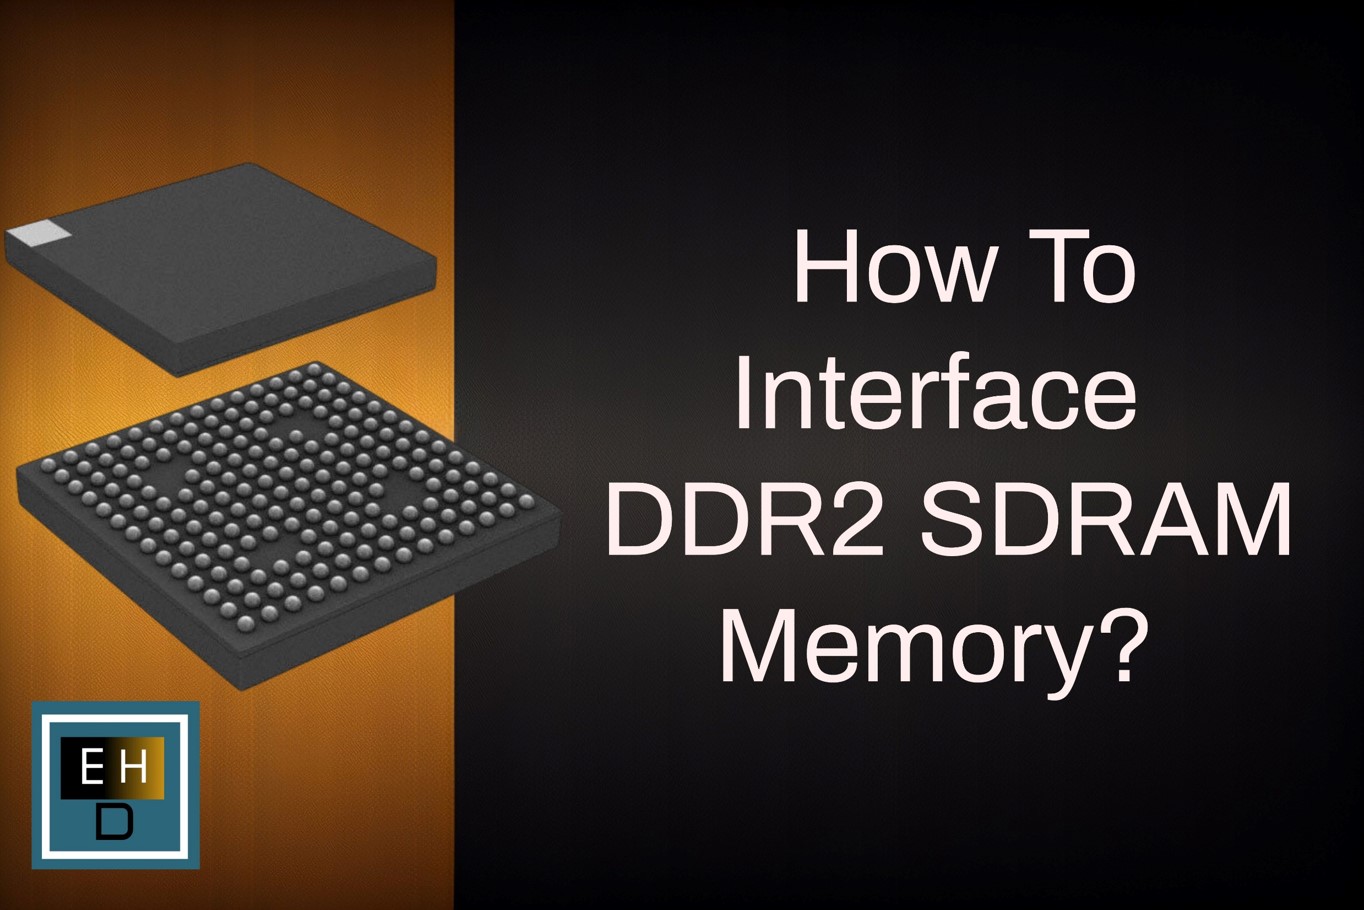 How to Interface DDR2 SDRAM Memory